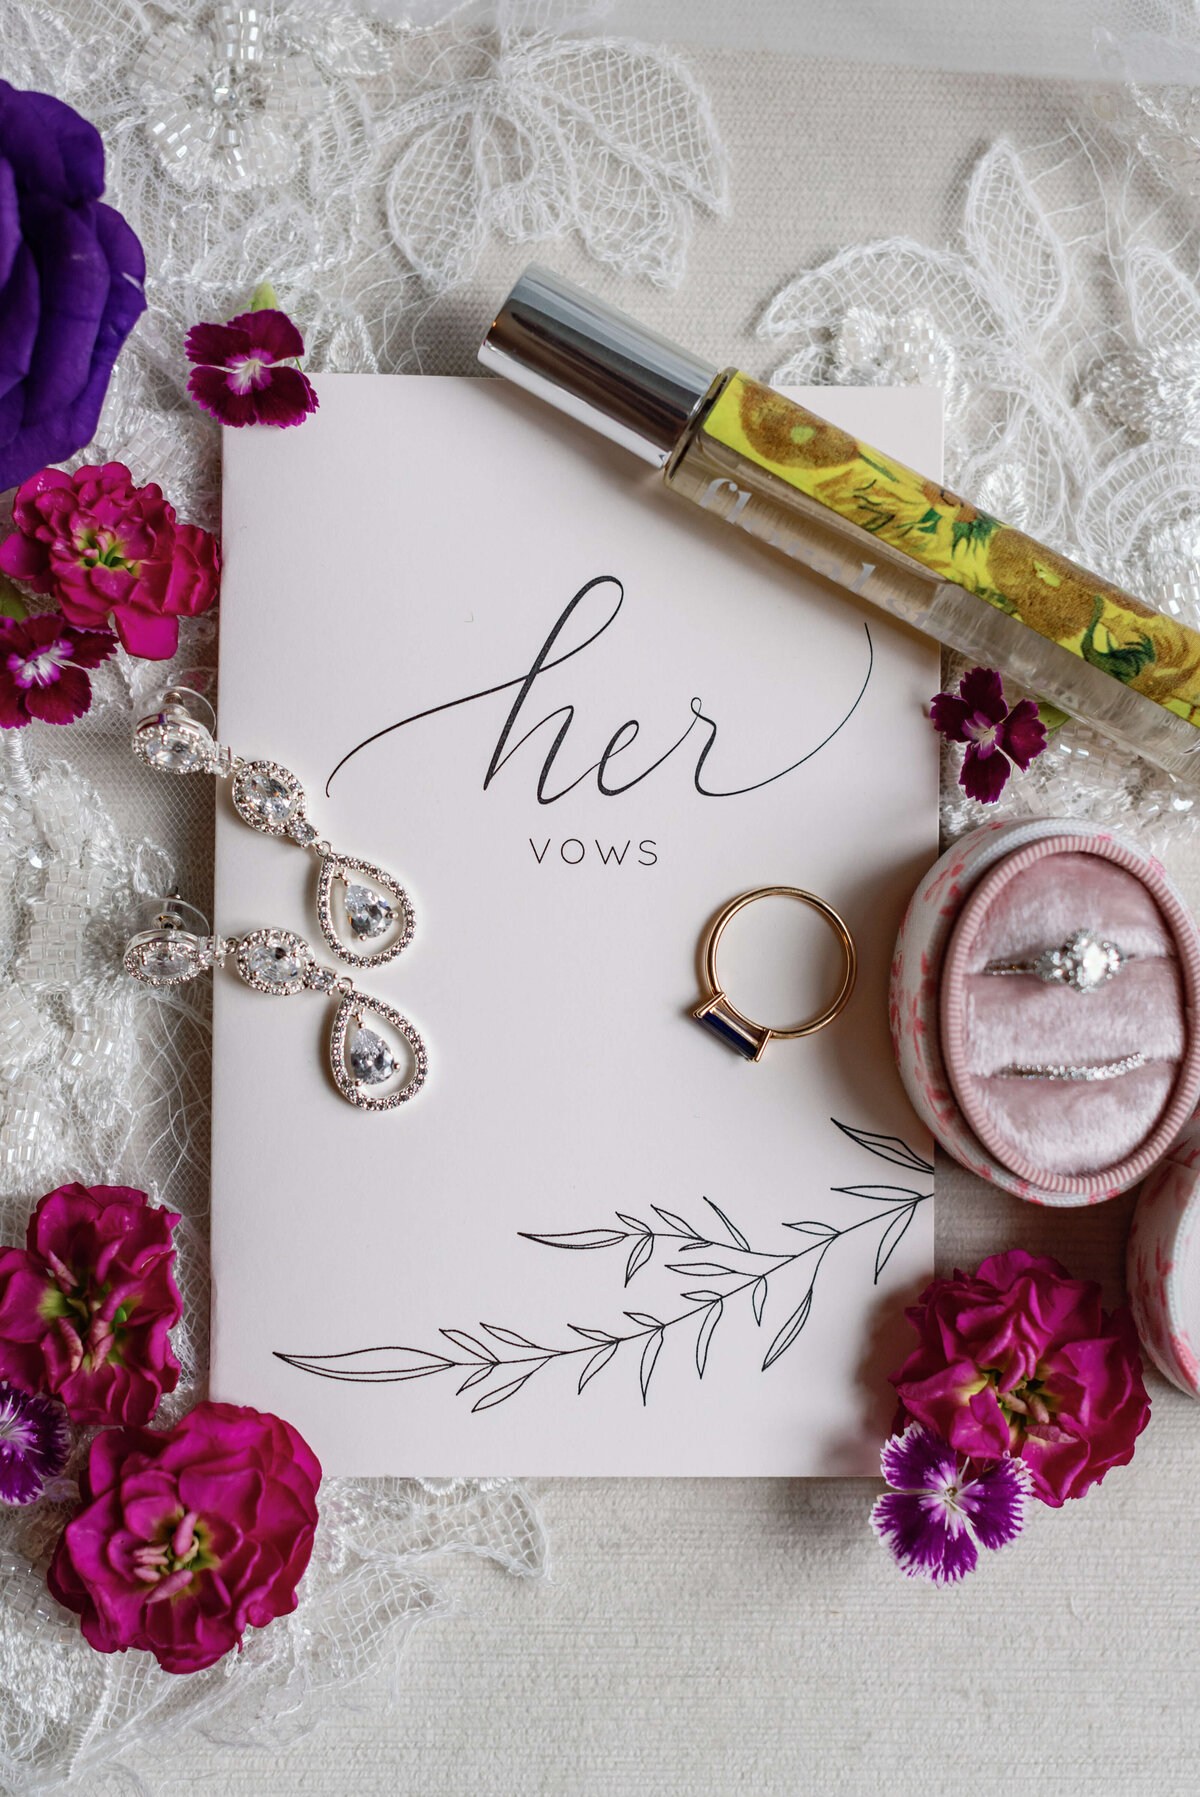 Wedding details including rings, vow book, earrings and perfume